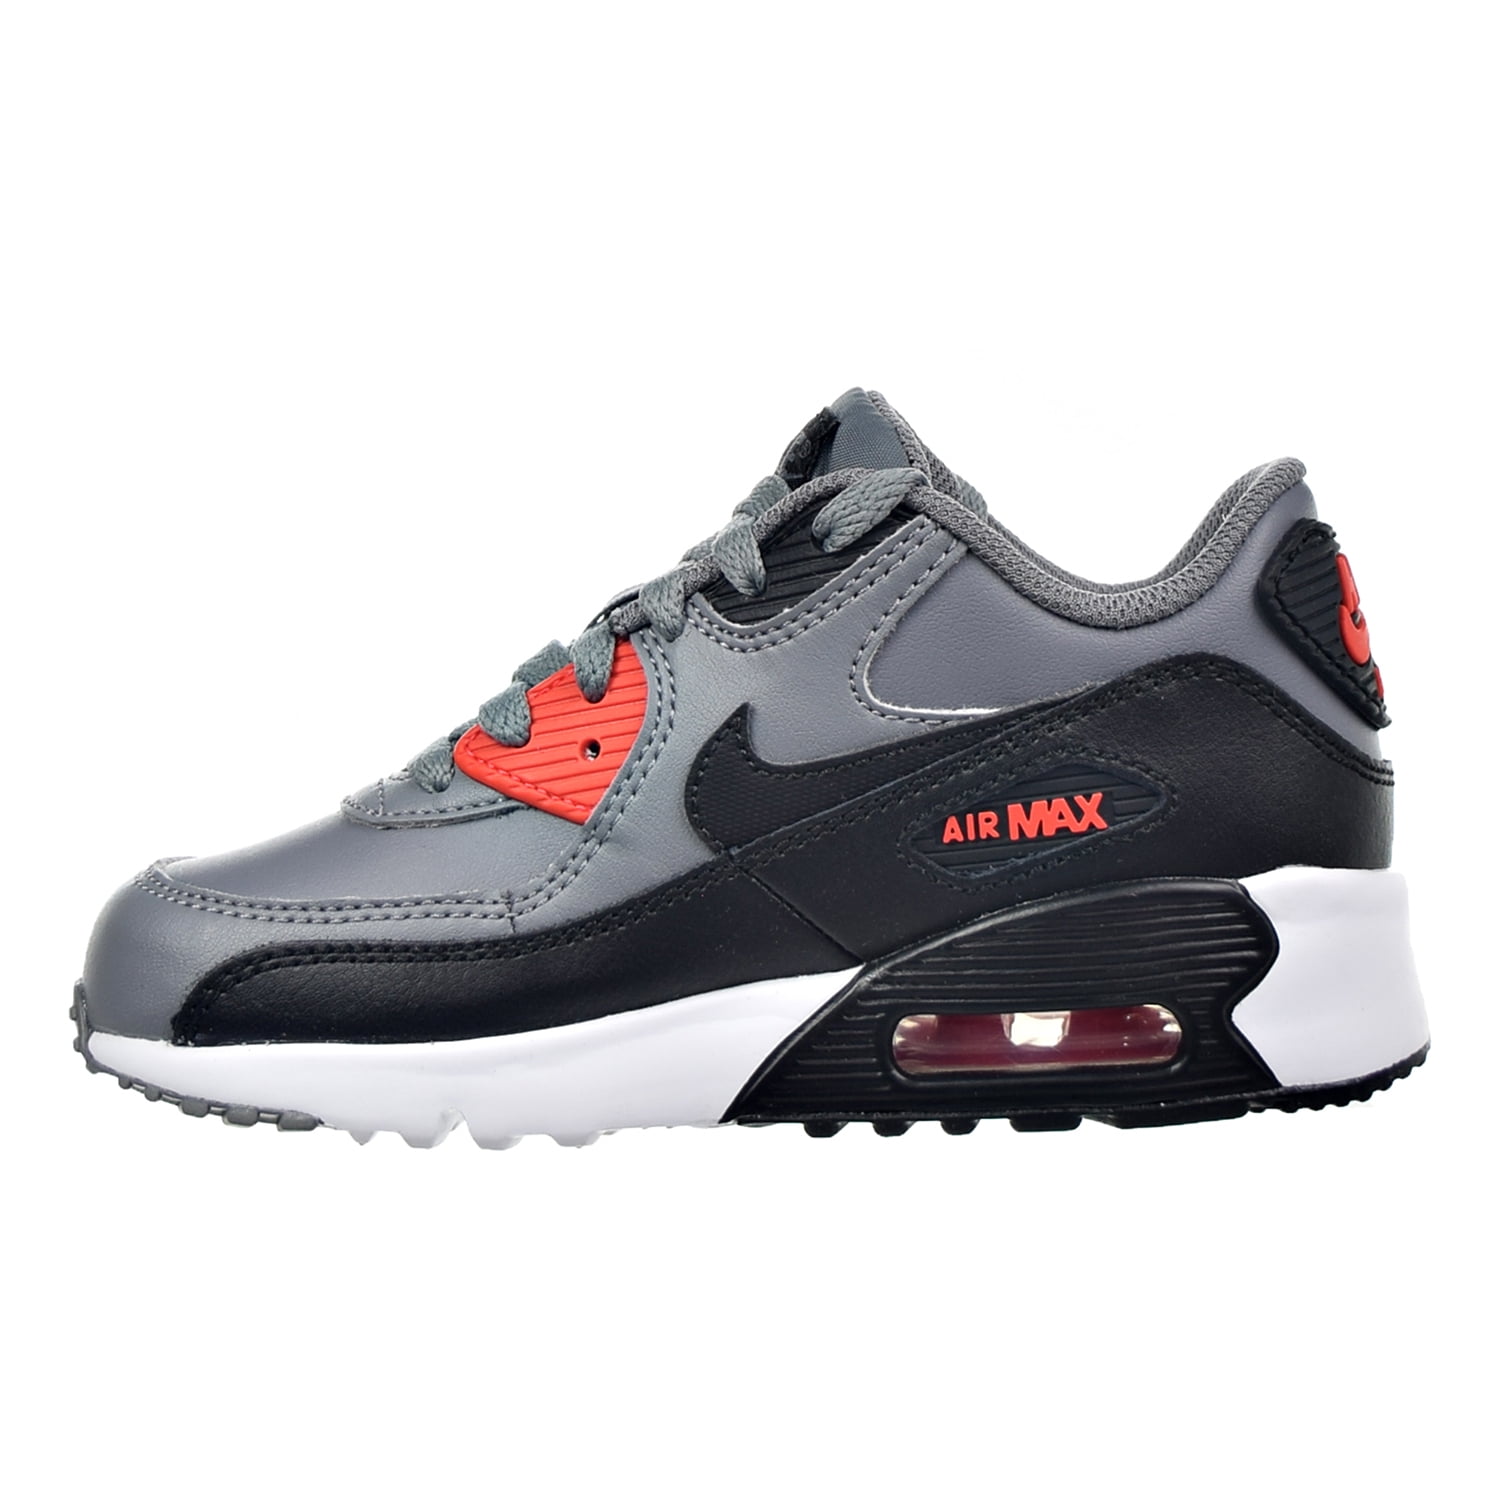 Nike Air Max 90 LTR(PS) Little Kid's Shoes Cool Grey/Black/Max Orange  833414-010